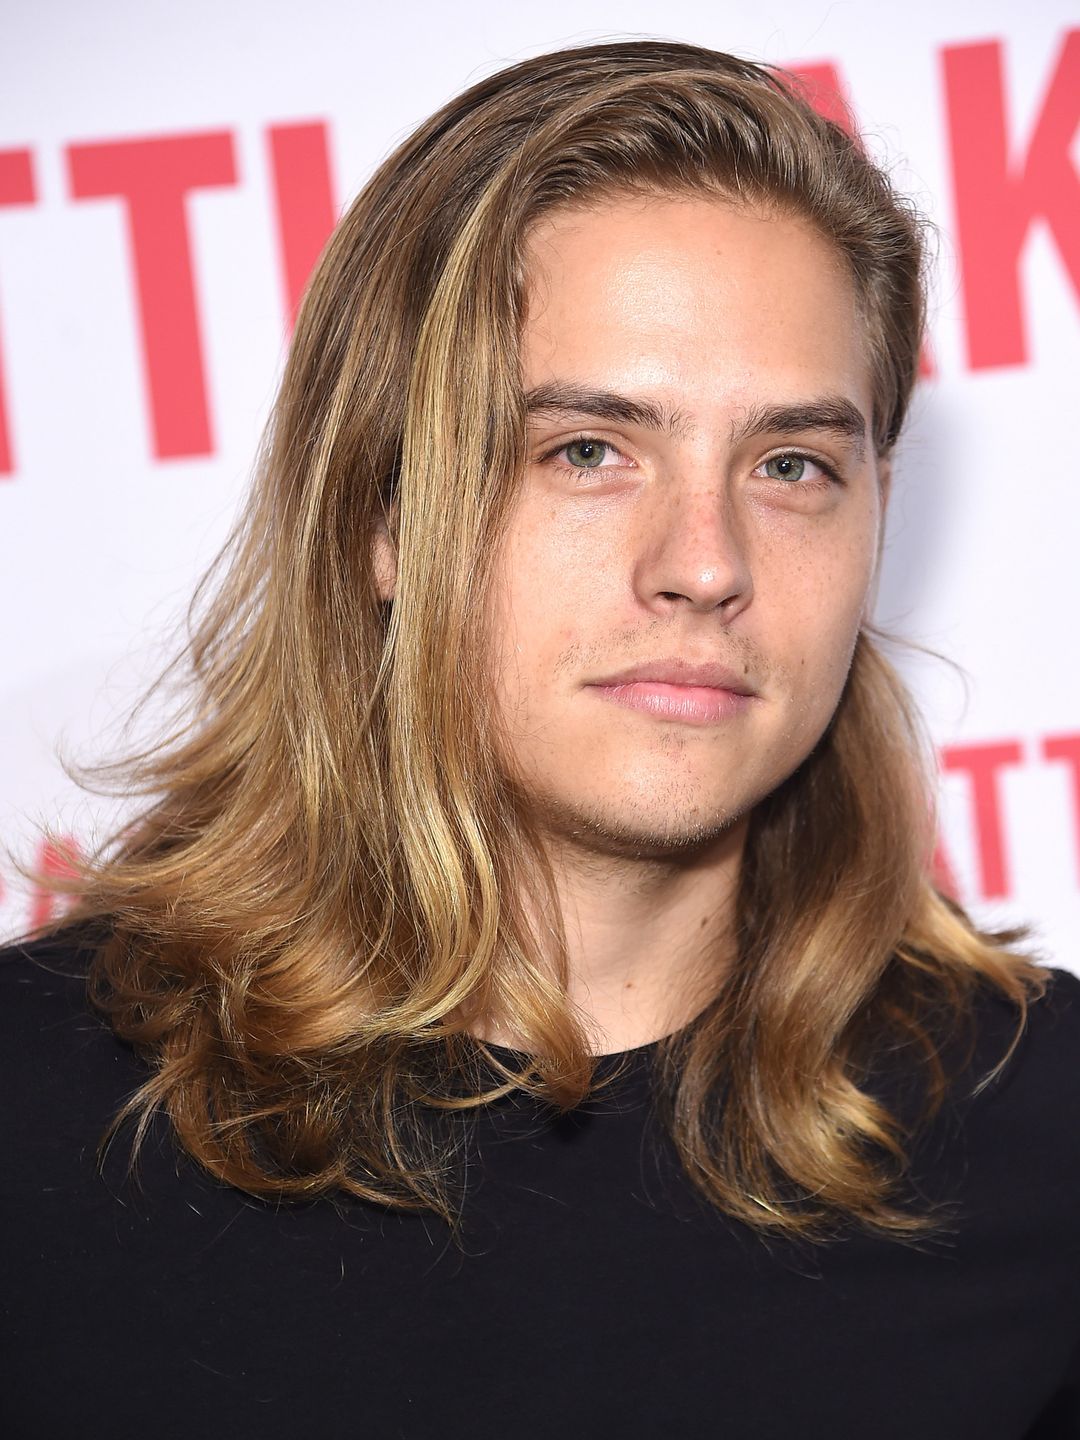 Dylan Sprouse date of birth